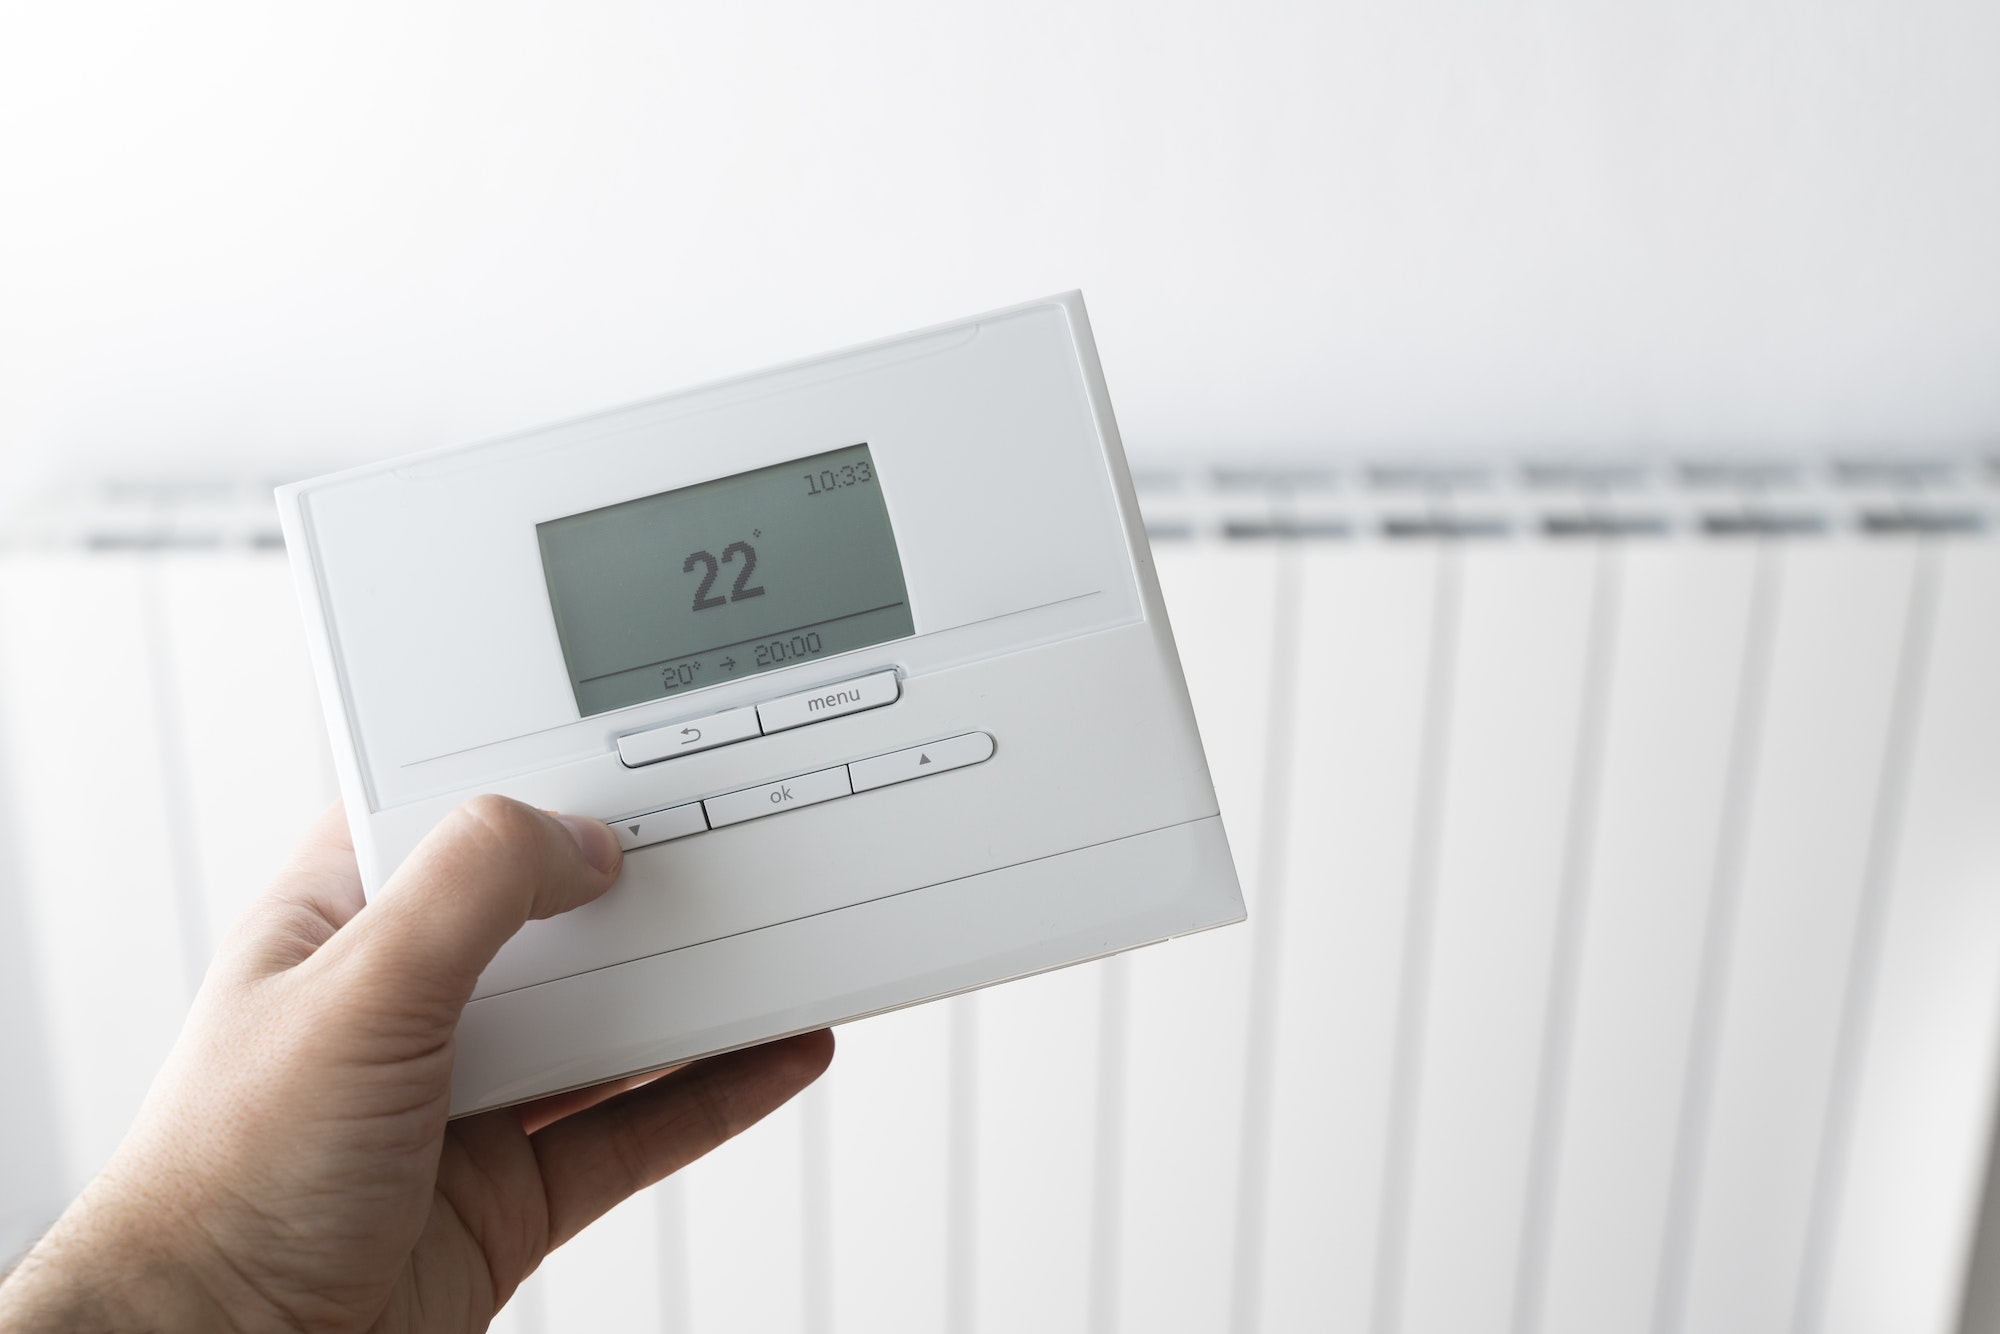 Lower the heating temperature to save money and energy with a remote control